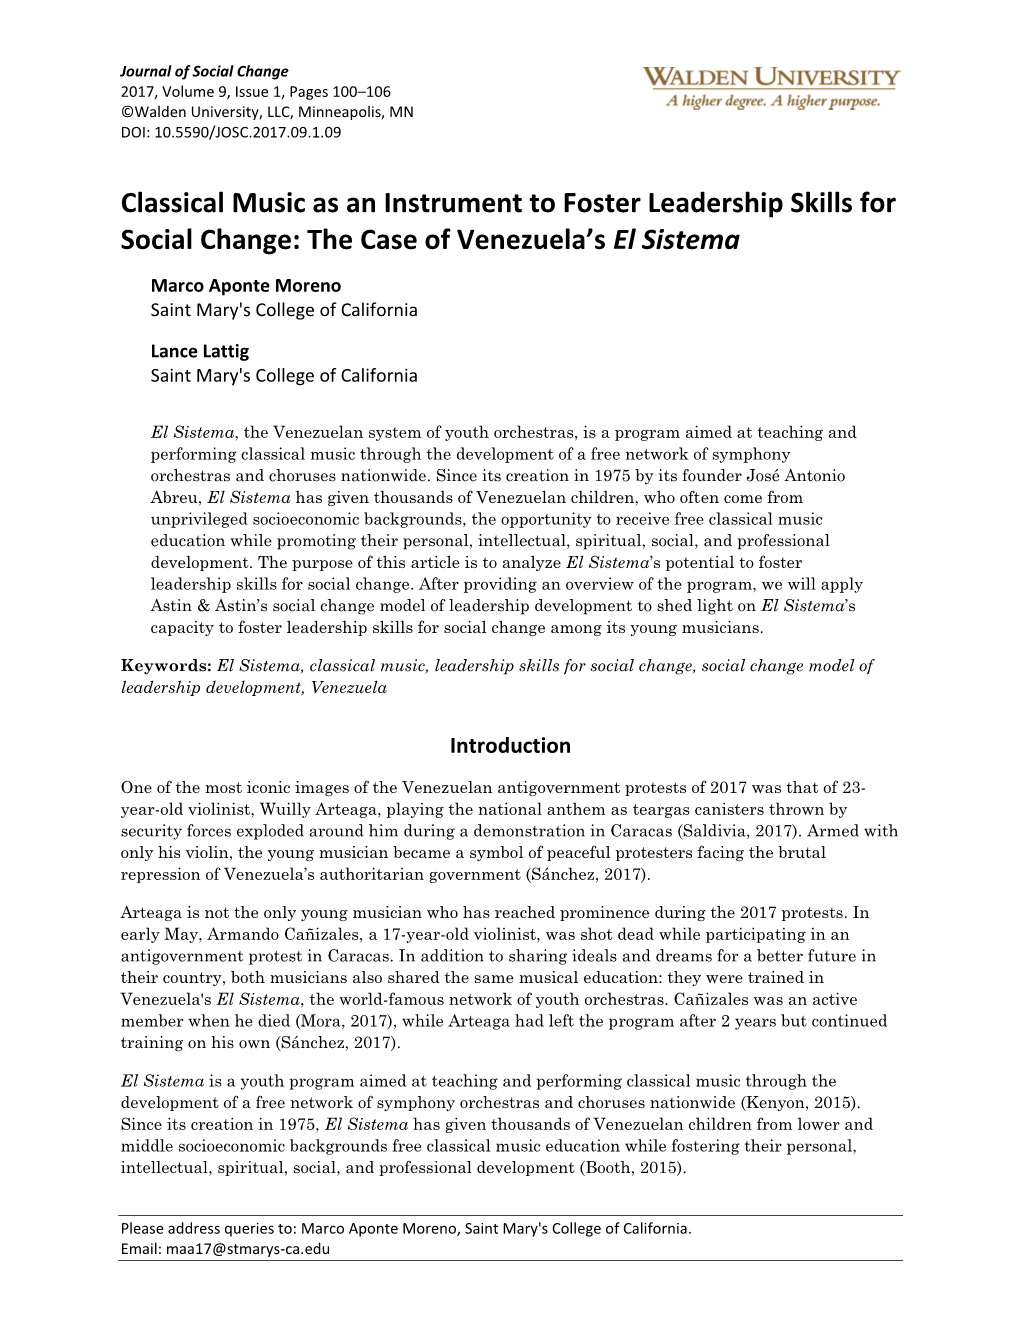 Classical Music As an Instrument to Foster Leadership Skills for Social Change: the Case of Venezuela’S El Sistema